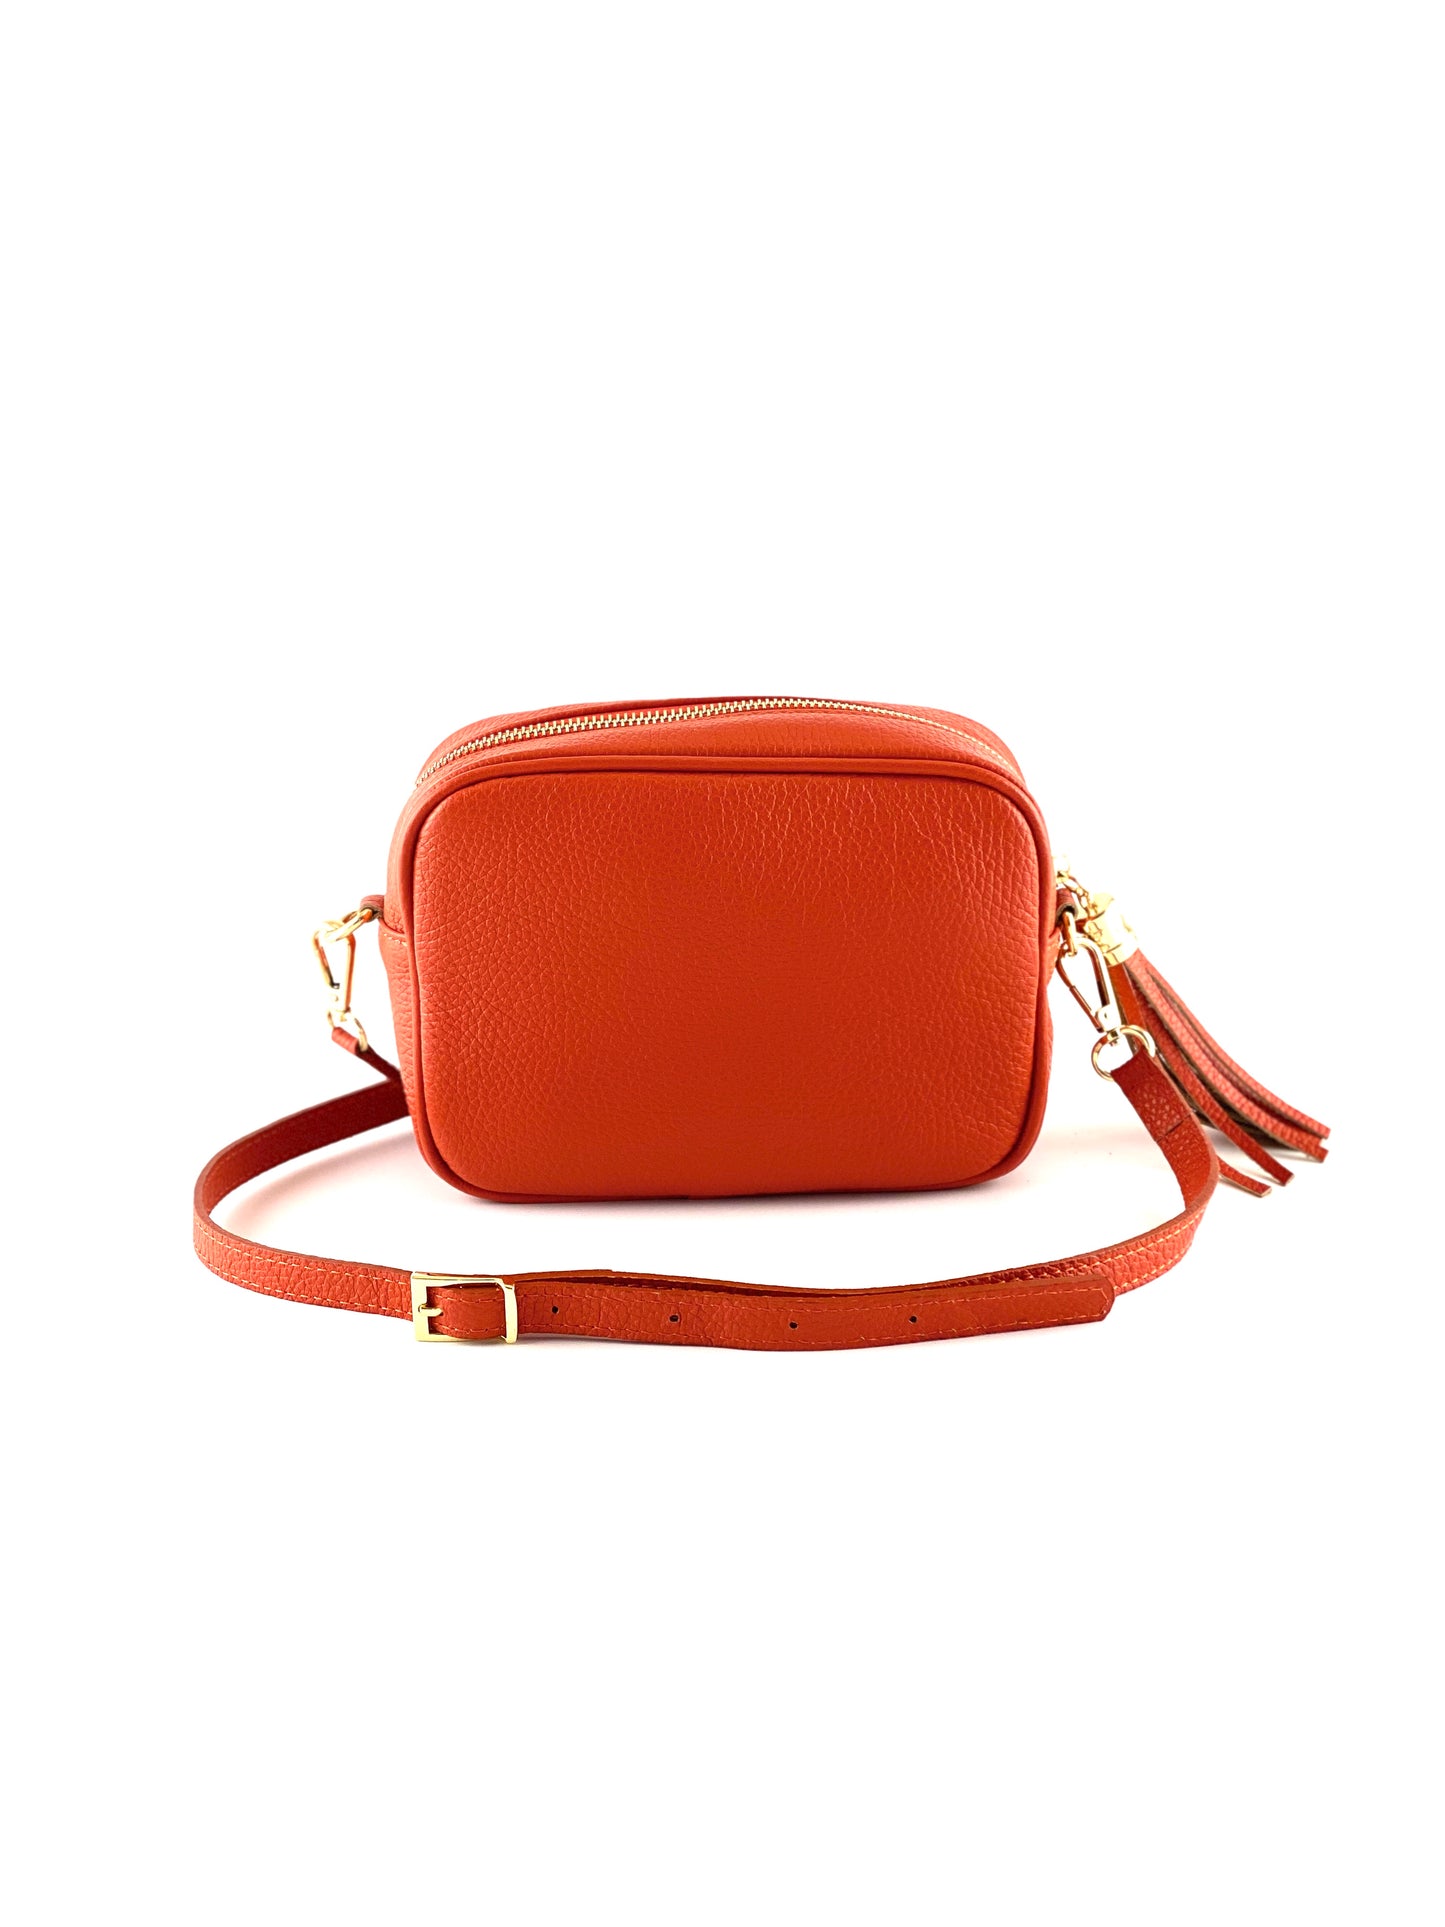 An image of a small orange leather messenger bag with a leather tassel on the zip which opens across the top of the bag.